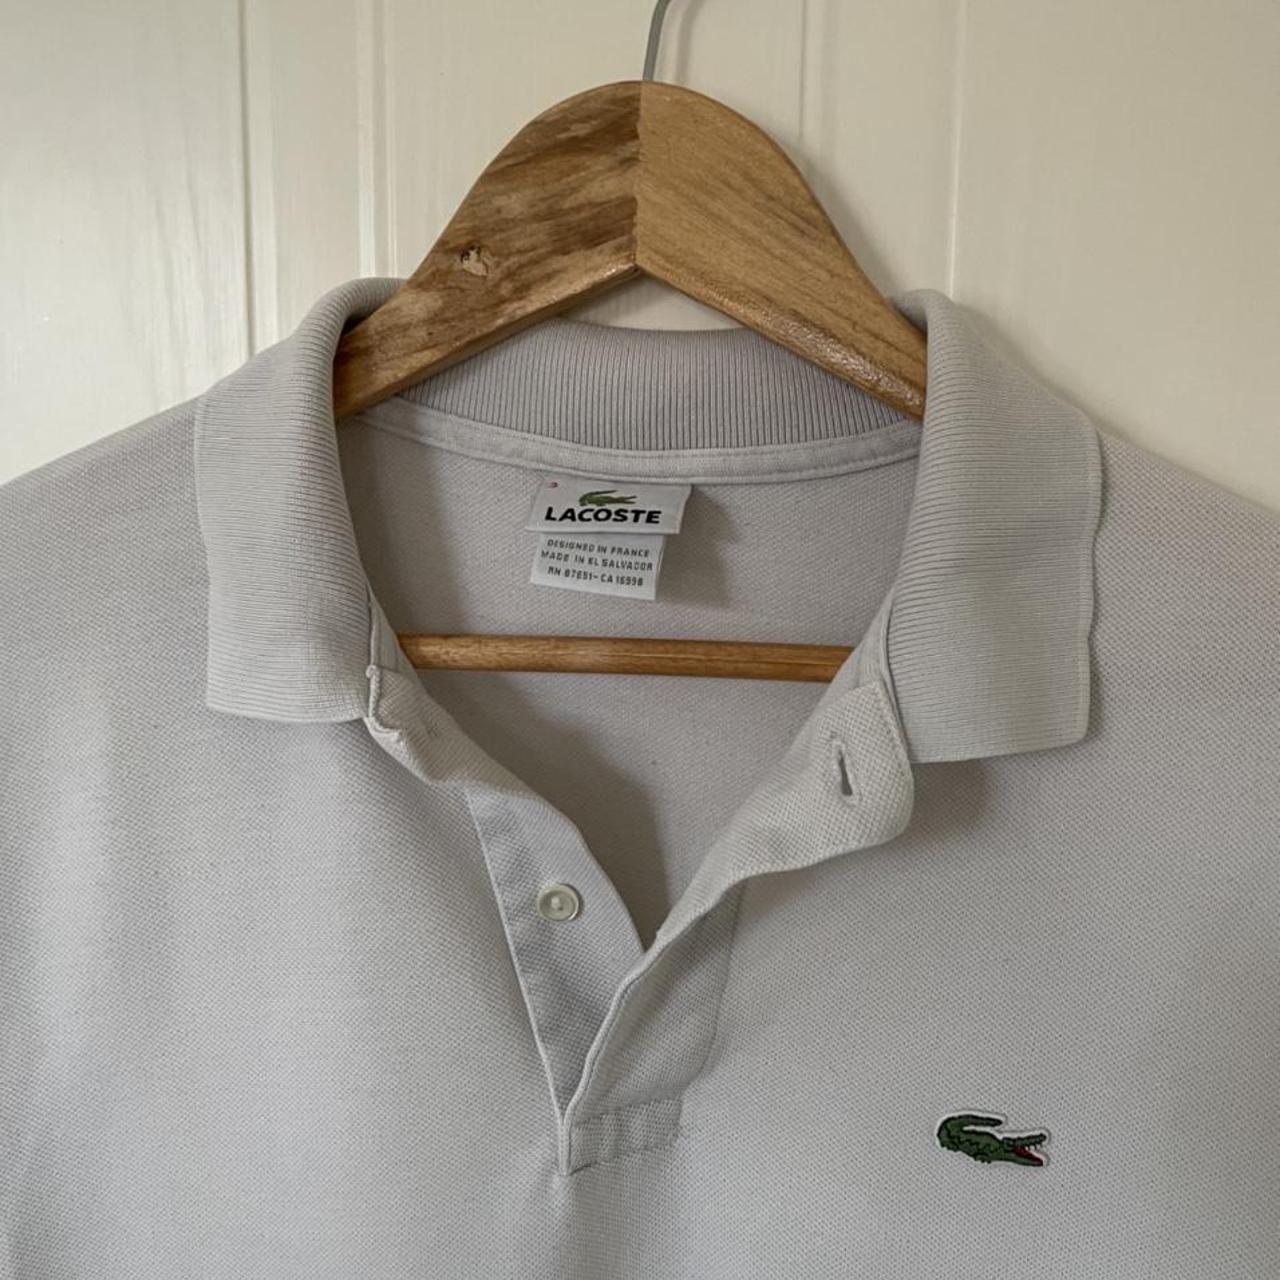 Iconic Lacoste white polo shirt, men’s size 3 which... - Depop